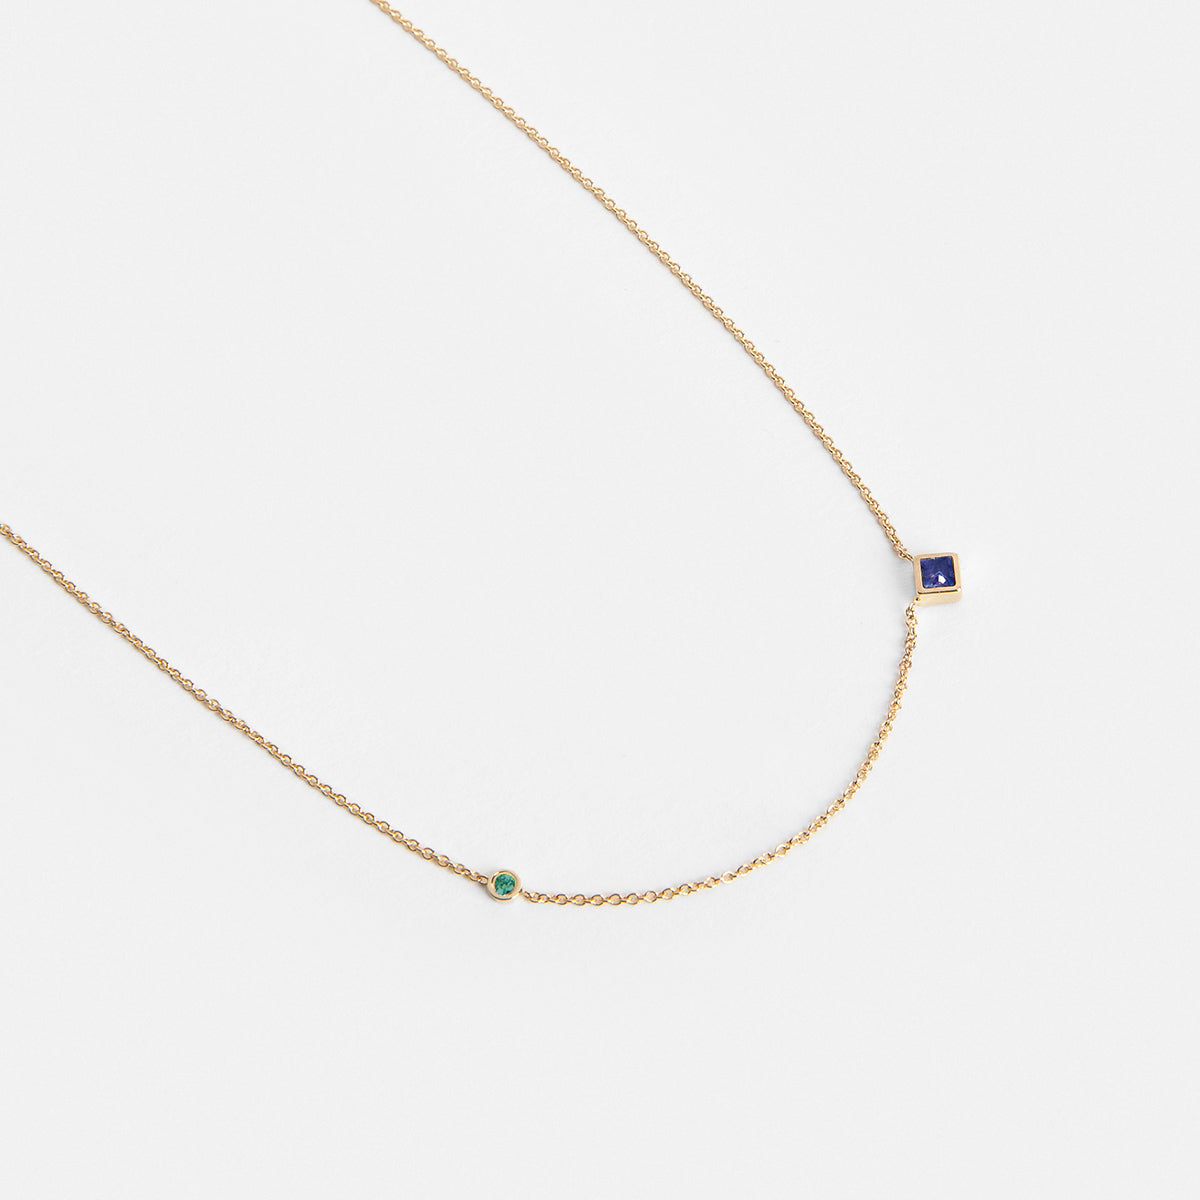 Isu Handmade Necklace in 14k Gold set with Sapphire and Emerald By SHW Fine Jewelry NYC